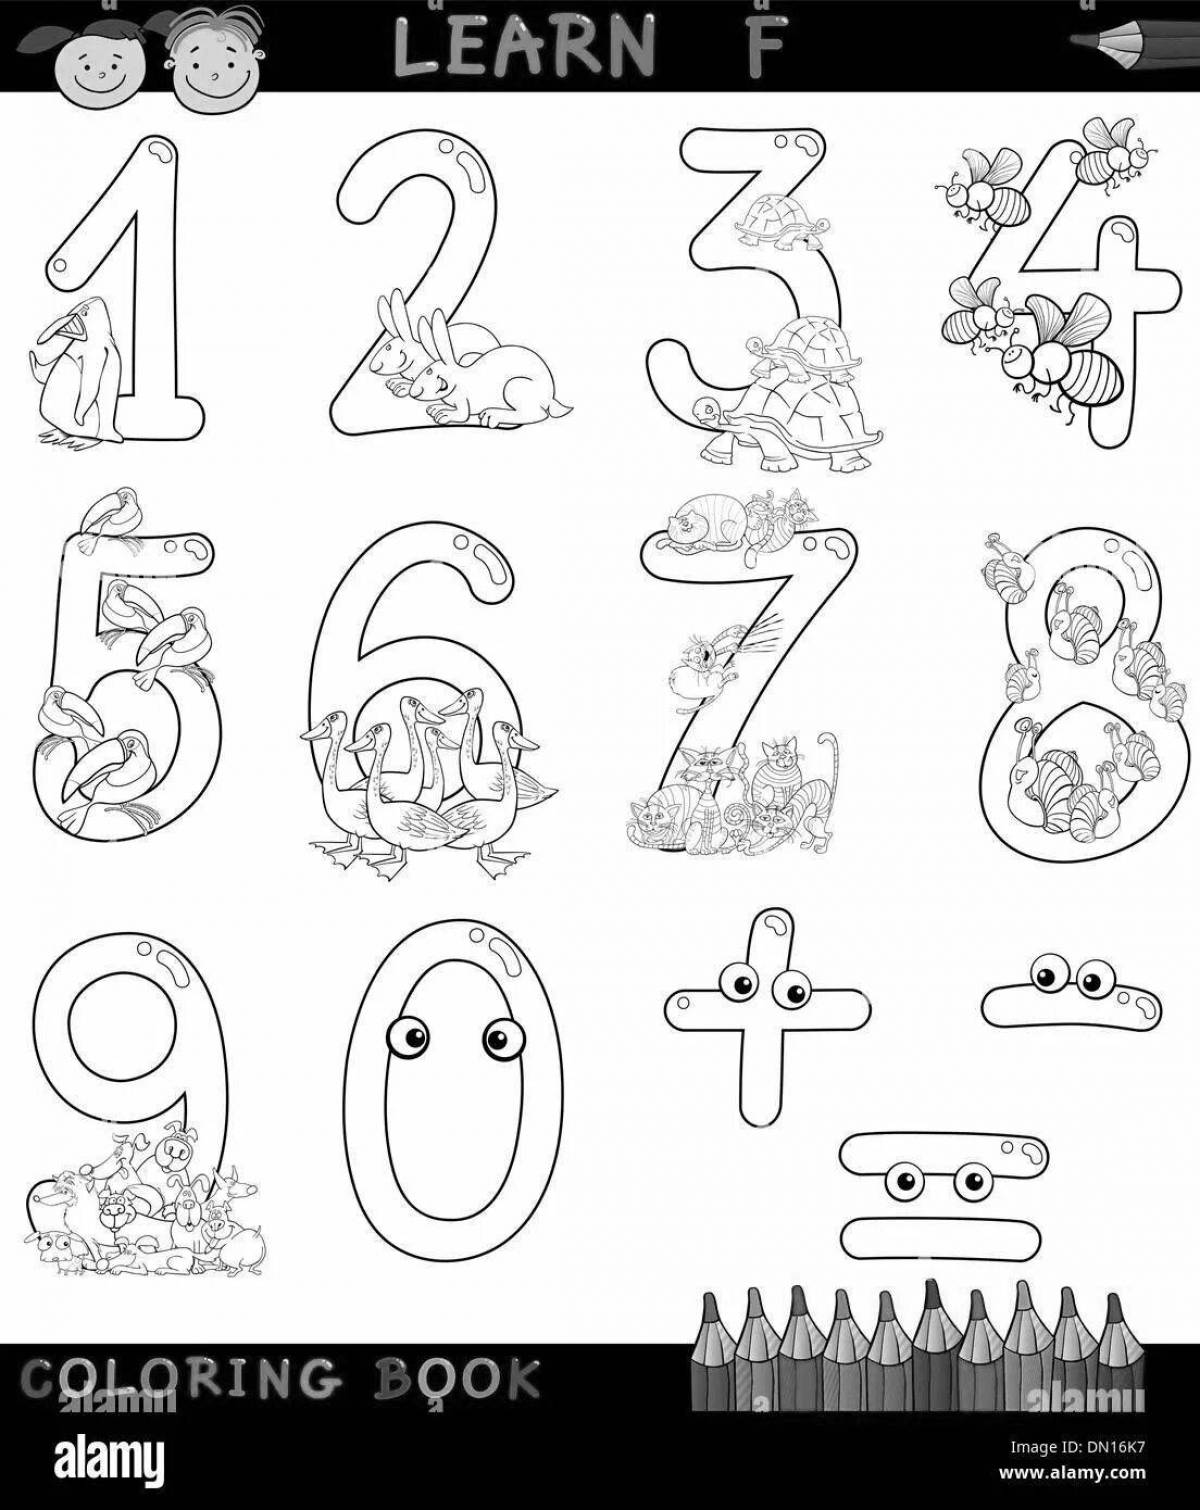 Color-loving animal shaped numbers coloring pages